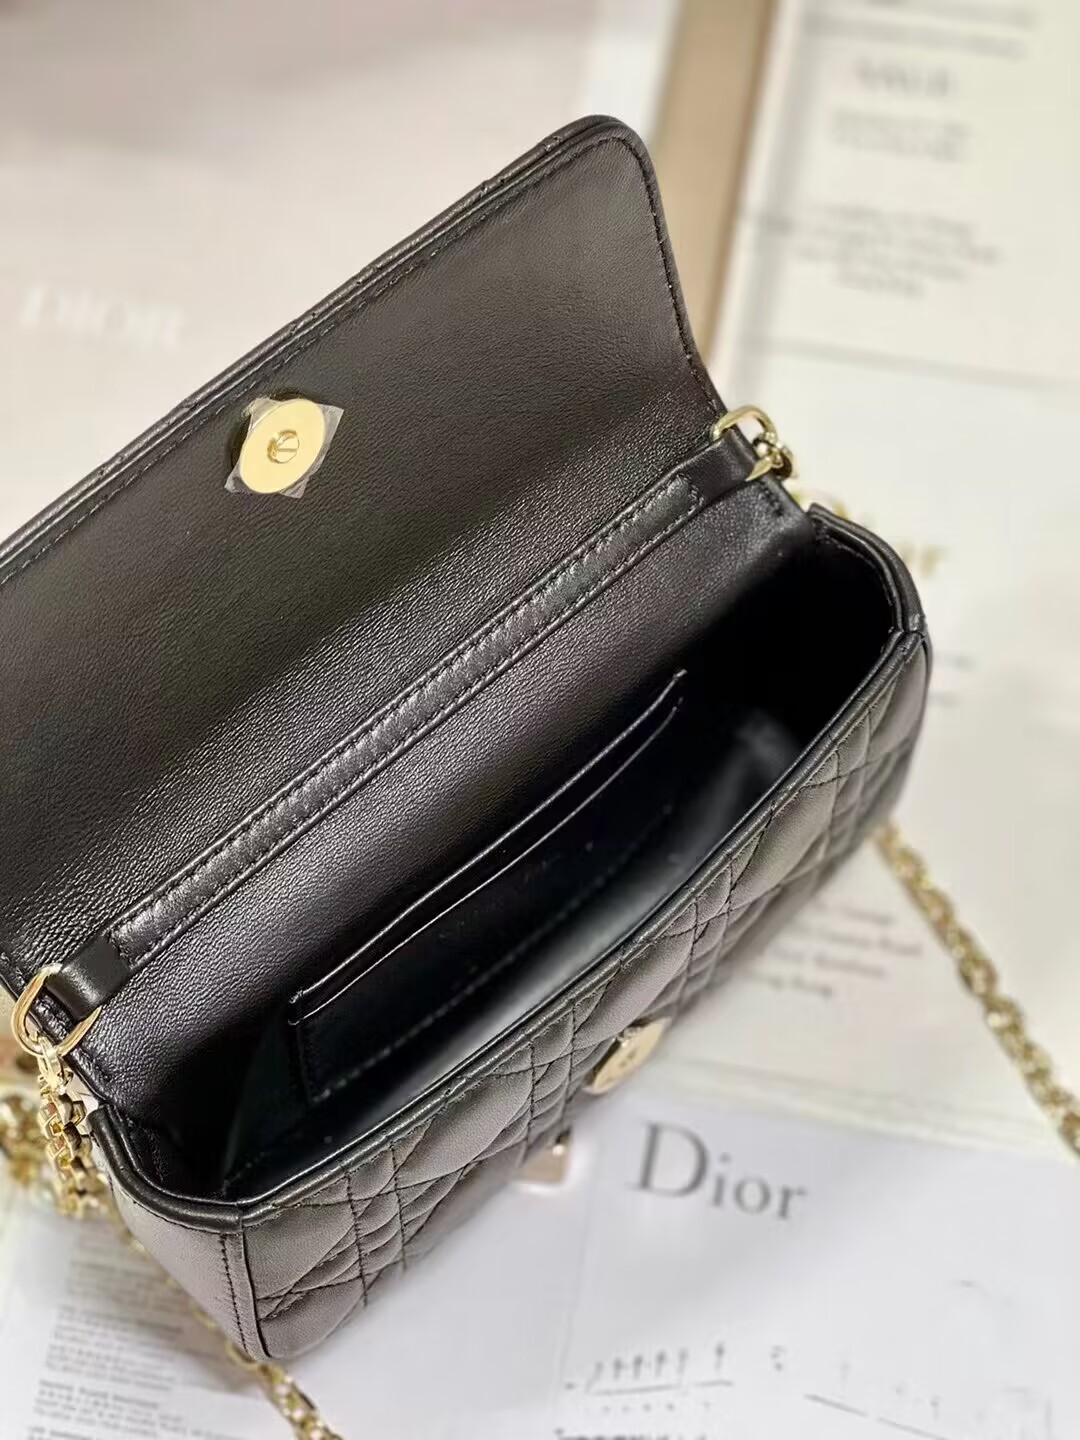 LADY DIOR PHONE POUCH Aesthetic Cannage Lambskin S0977OE black